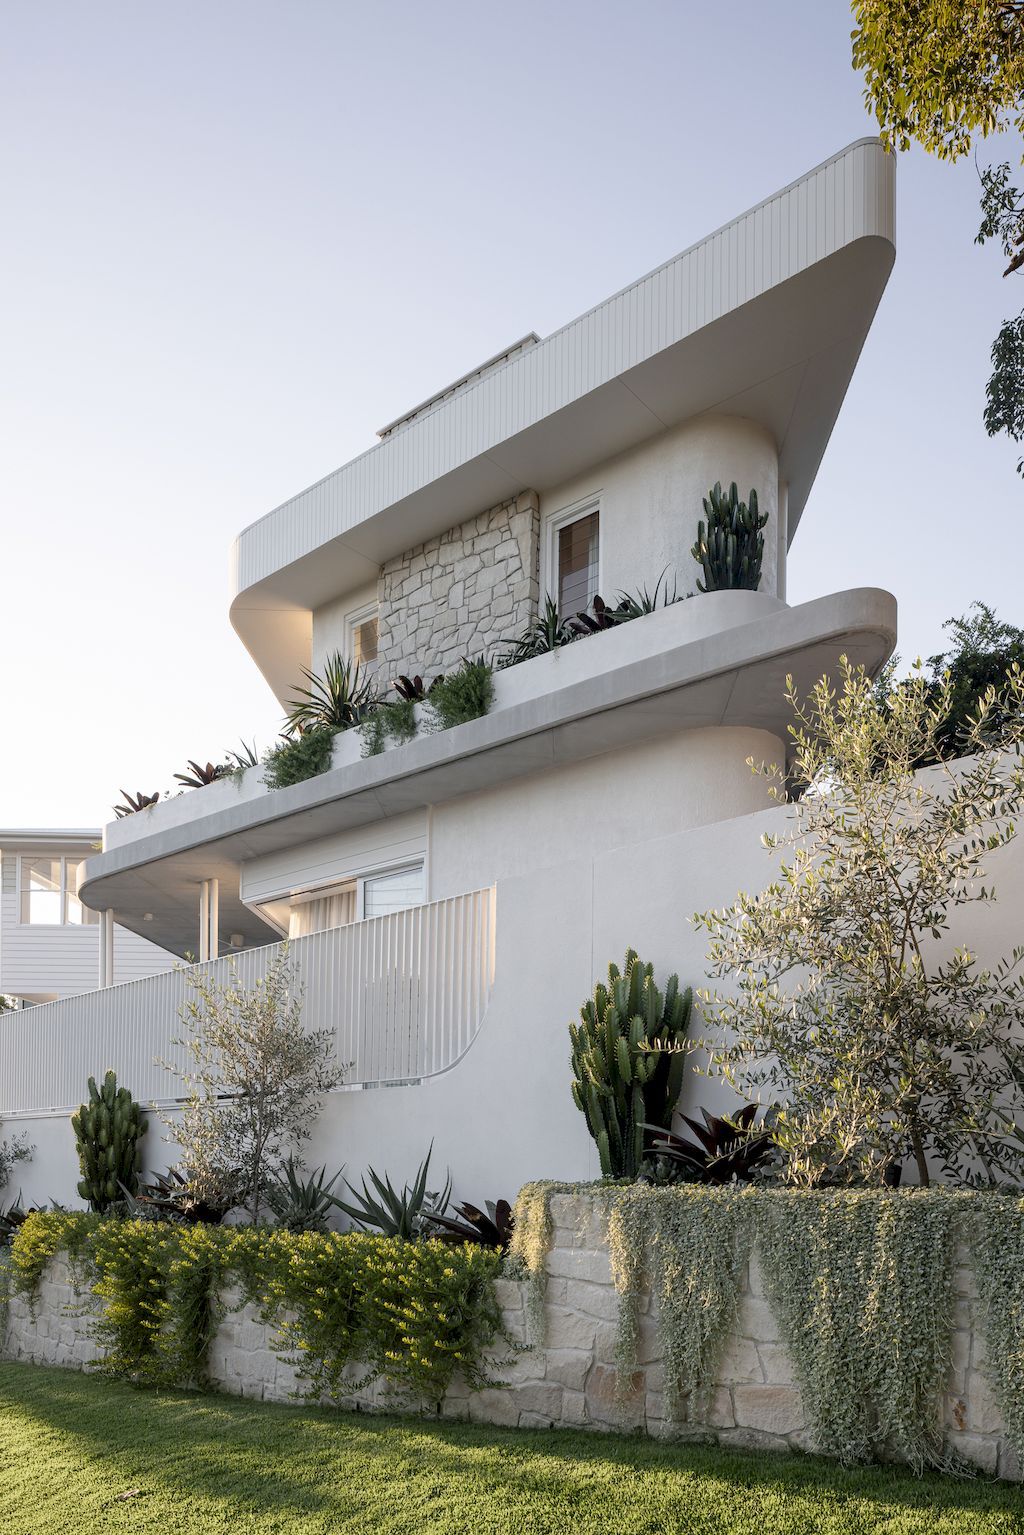 Clare House, a Prominent Luxurious White Home by Invilla Architecture